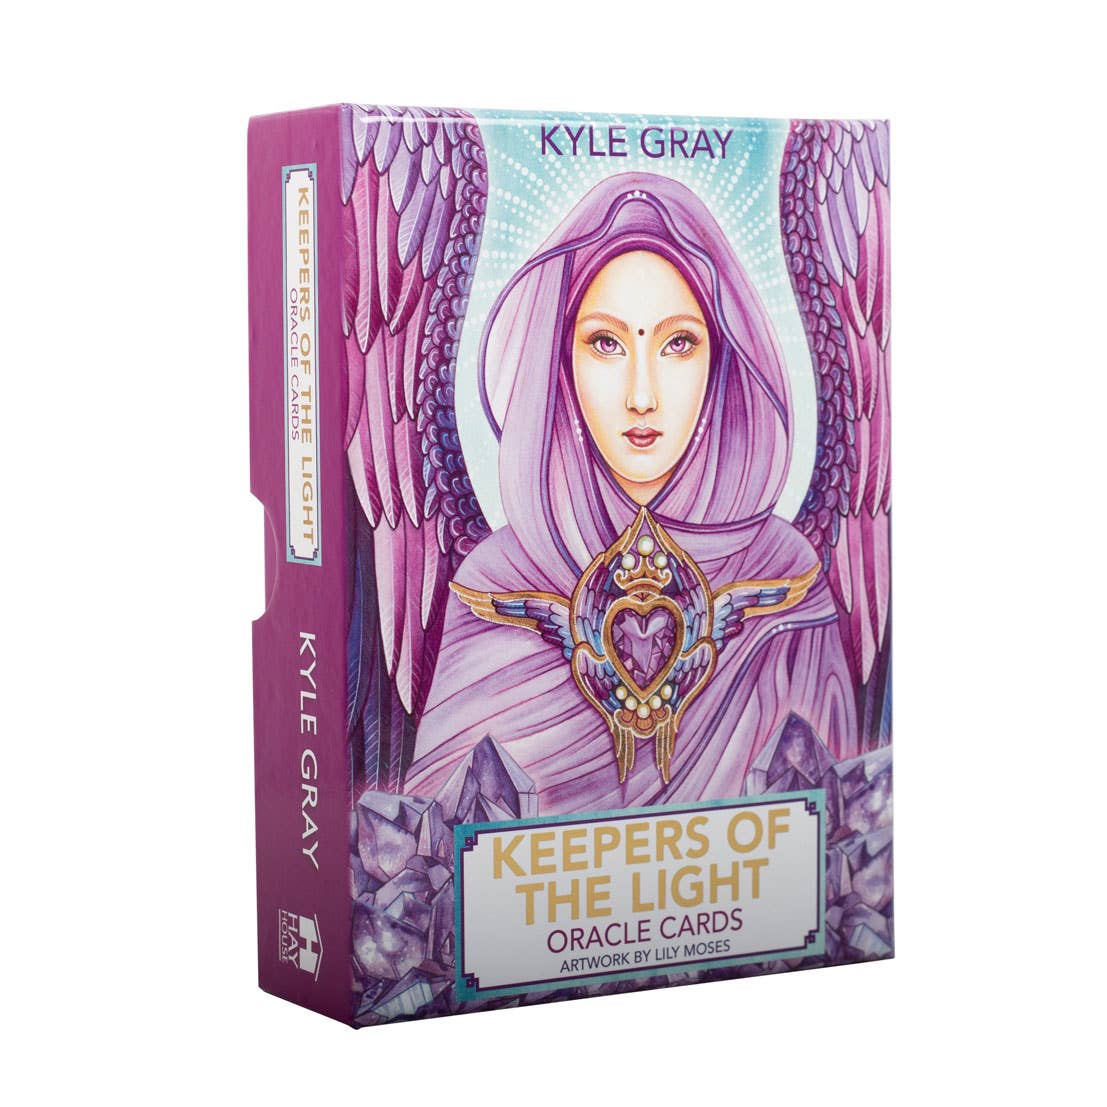 a box of keepers of the light oracle cards